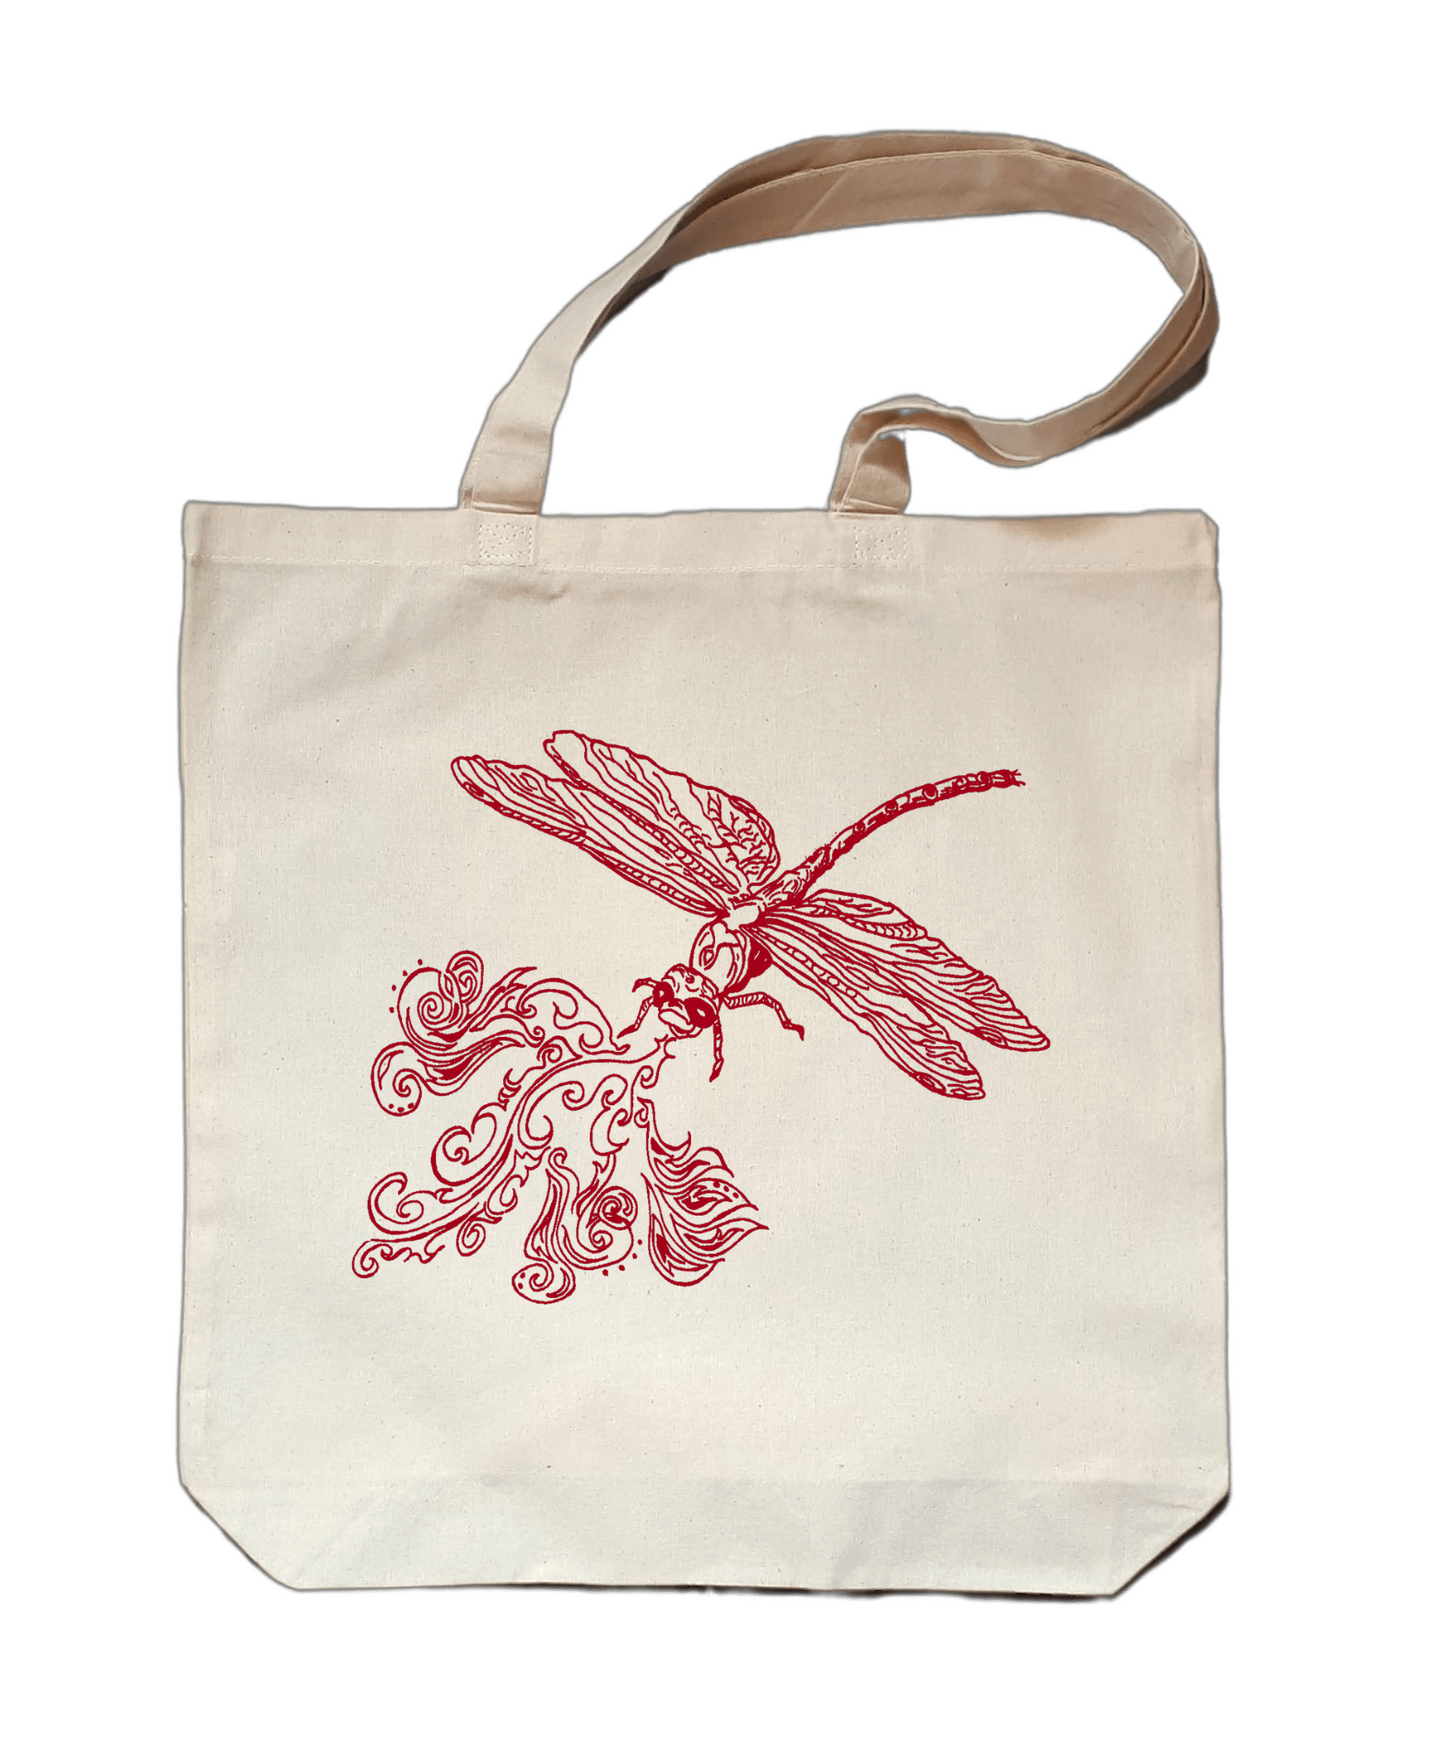 Fire Breathing Dragonfly Small Cotton Tote